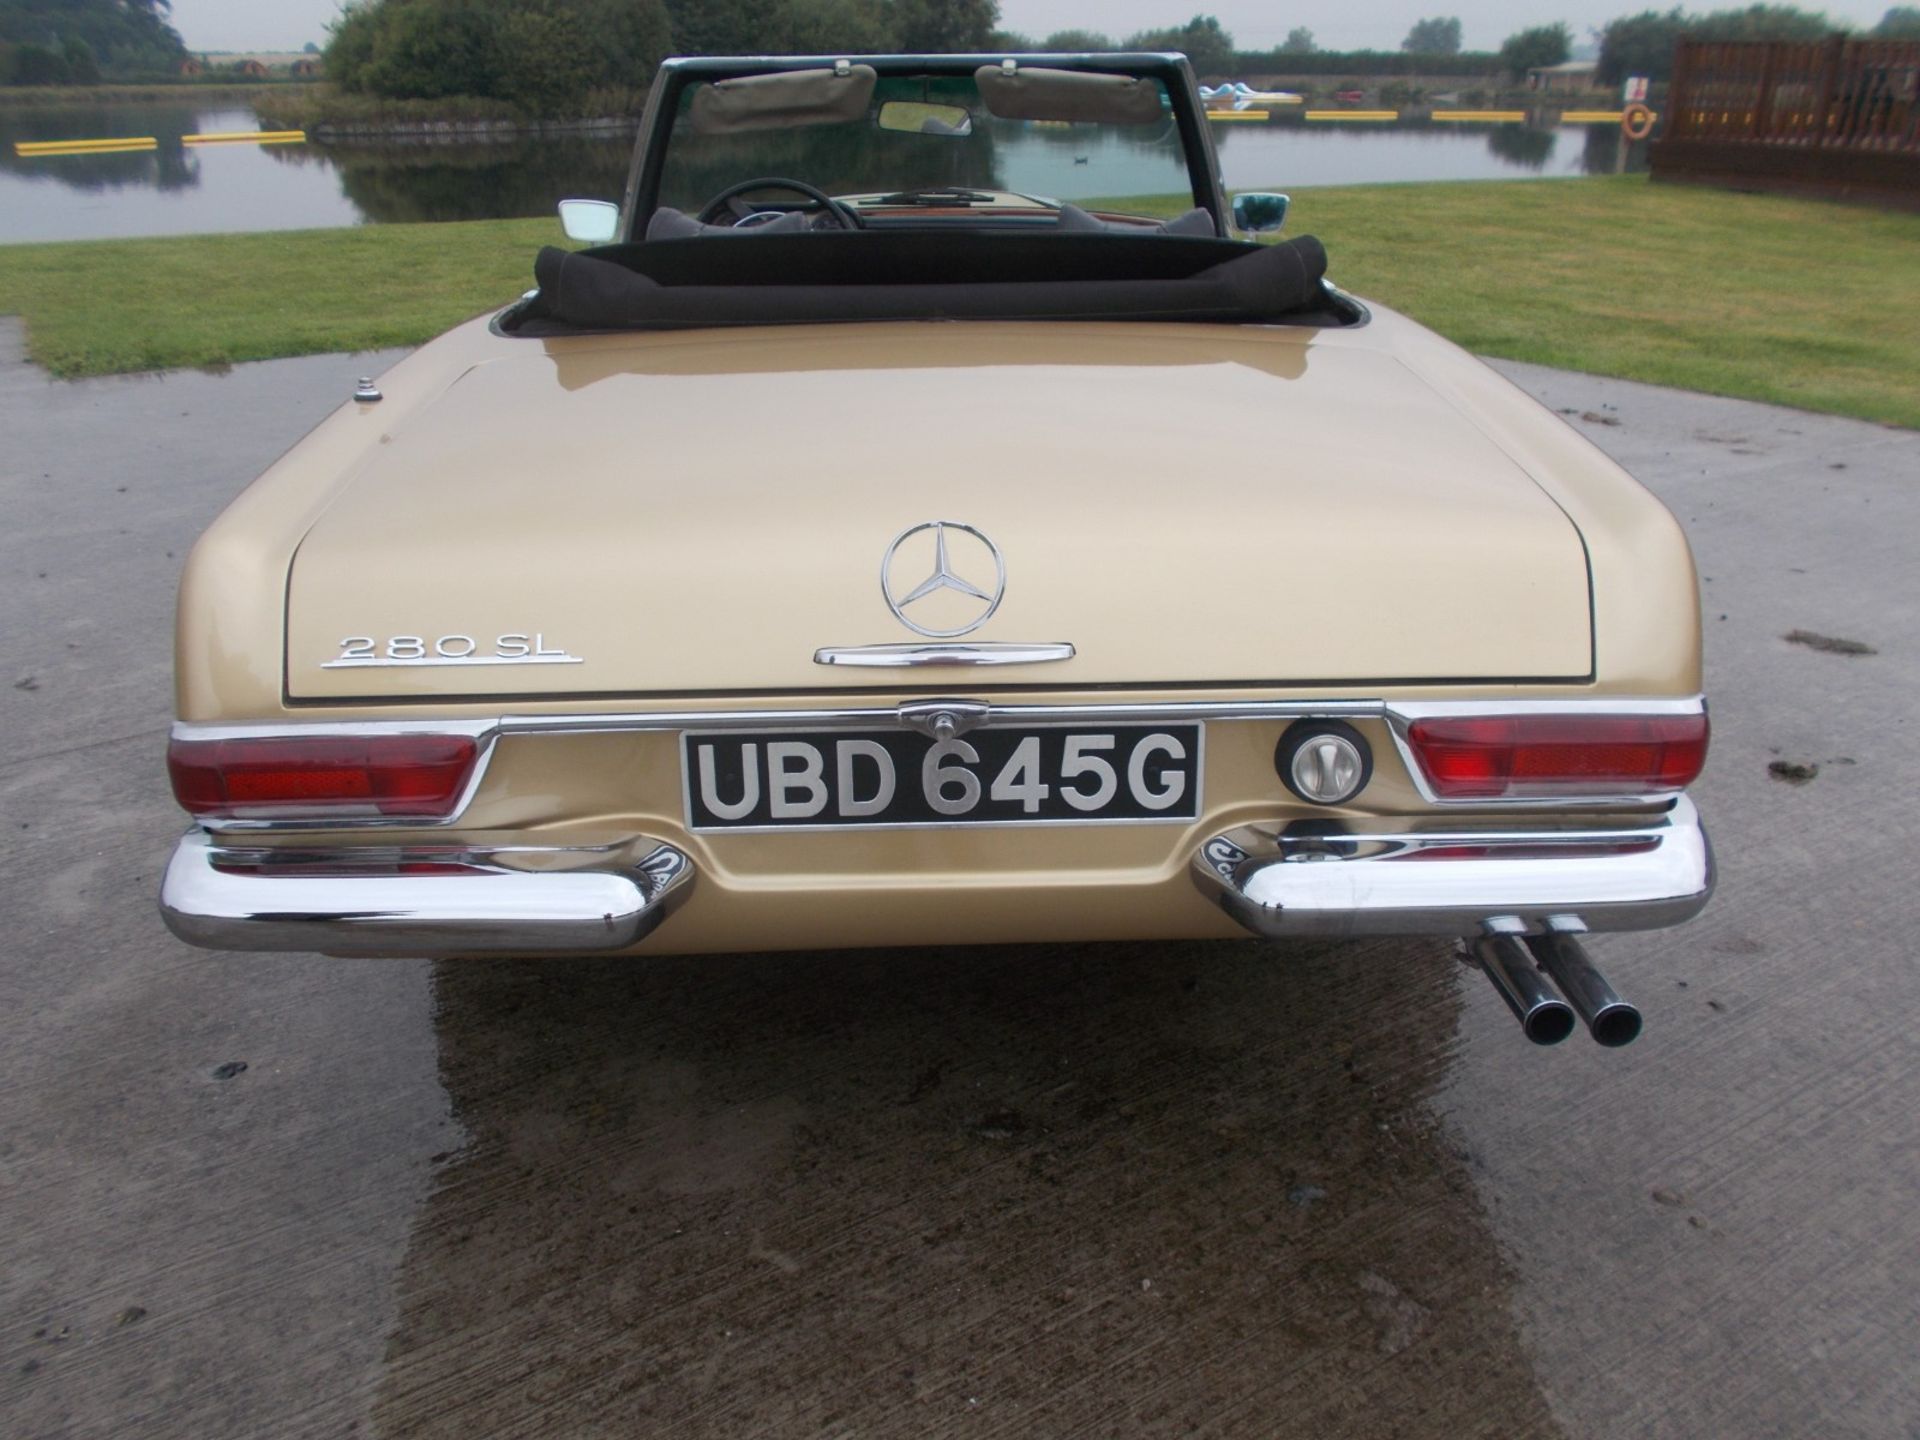 1969 MERCEDES 280SL PAGODA, AUTOMATIC, HARD/SOFT TOPS, LEFT HAND DRIVE, AMERICAN IMPORT *PLUS VAT* - Image 6 of 38